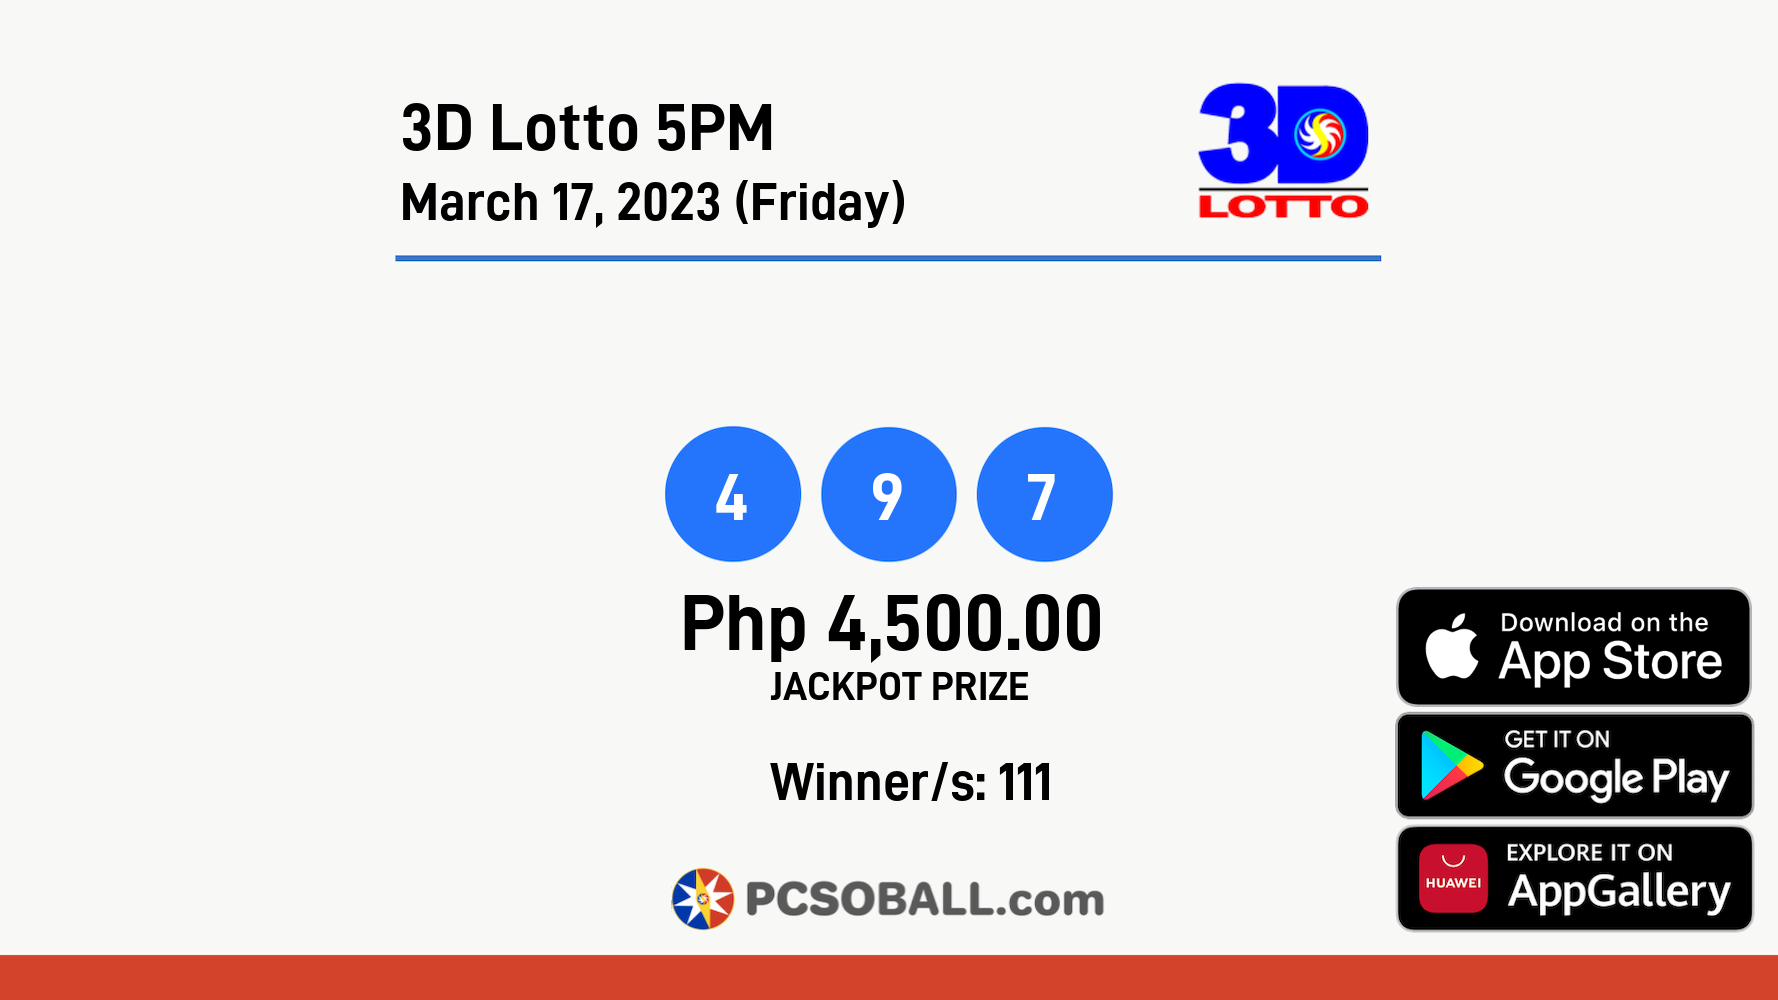 3D Lotto 5PM March 17, 2023 (Friday) Result